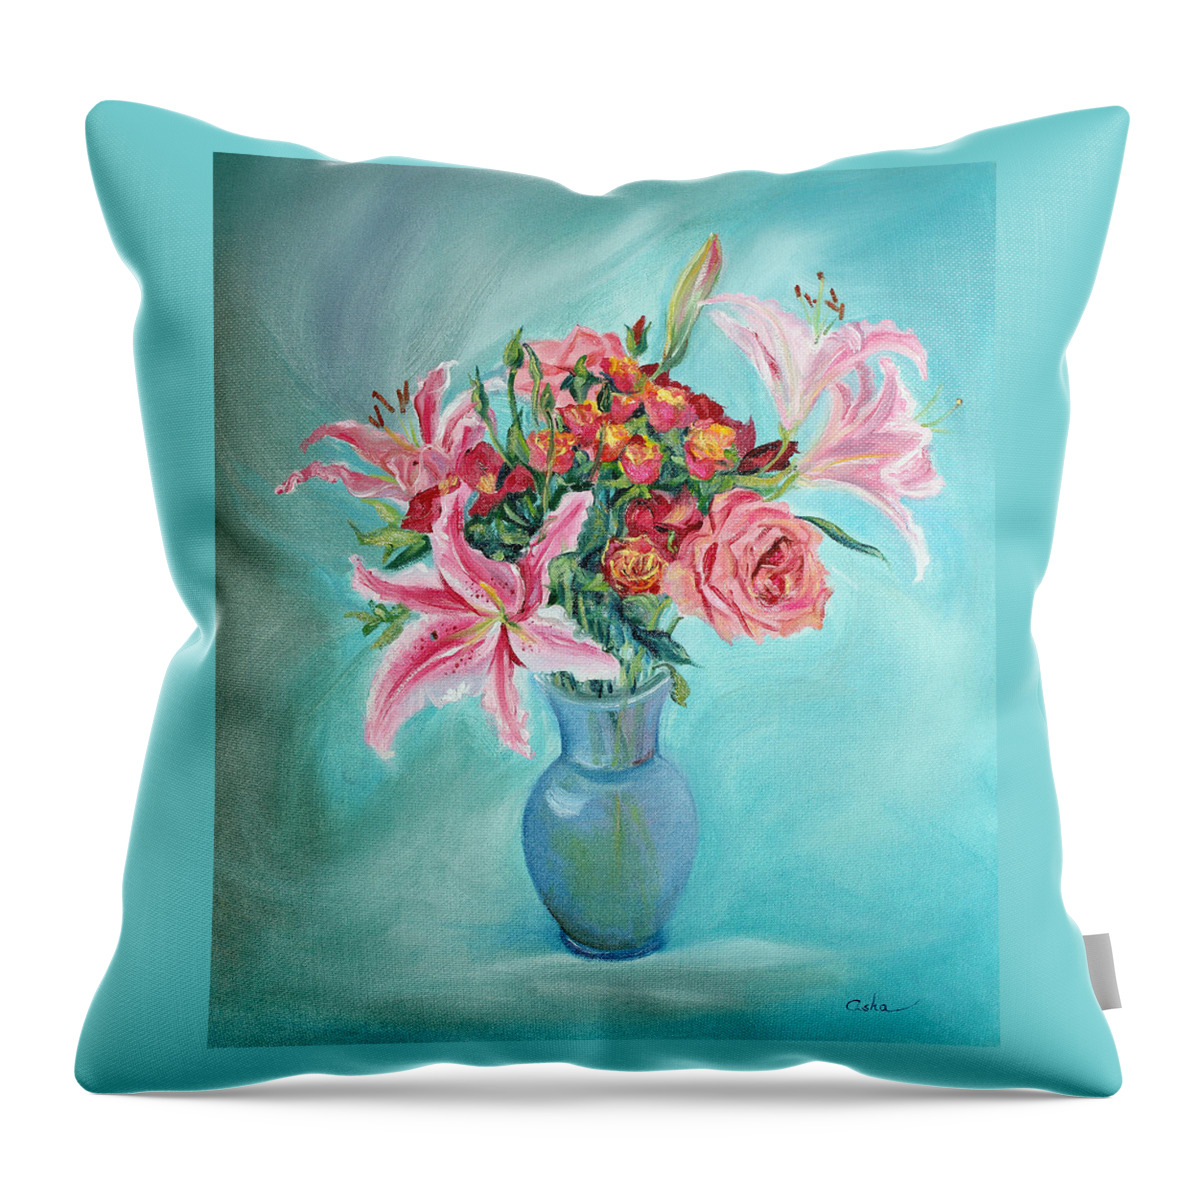 Floral Painting Throw Pillow featuring the painting Enduring Love Bouquet by Asha Carolyn Young